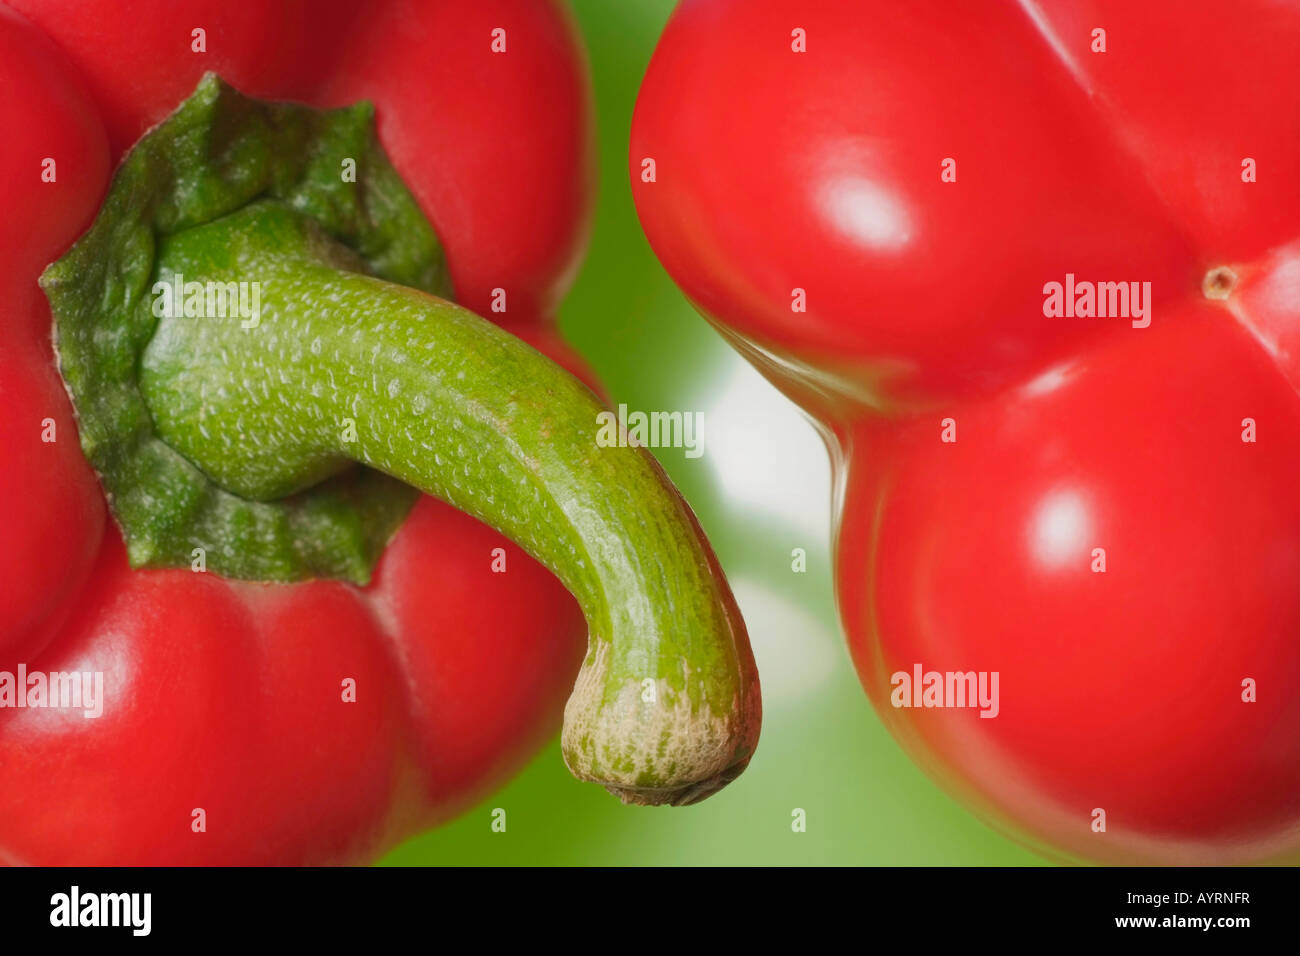 Red bell peppers (Capsicum), detail Stock Photo